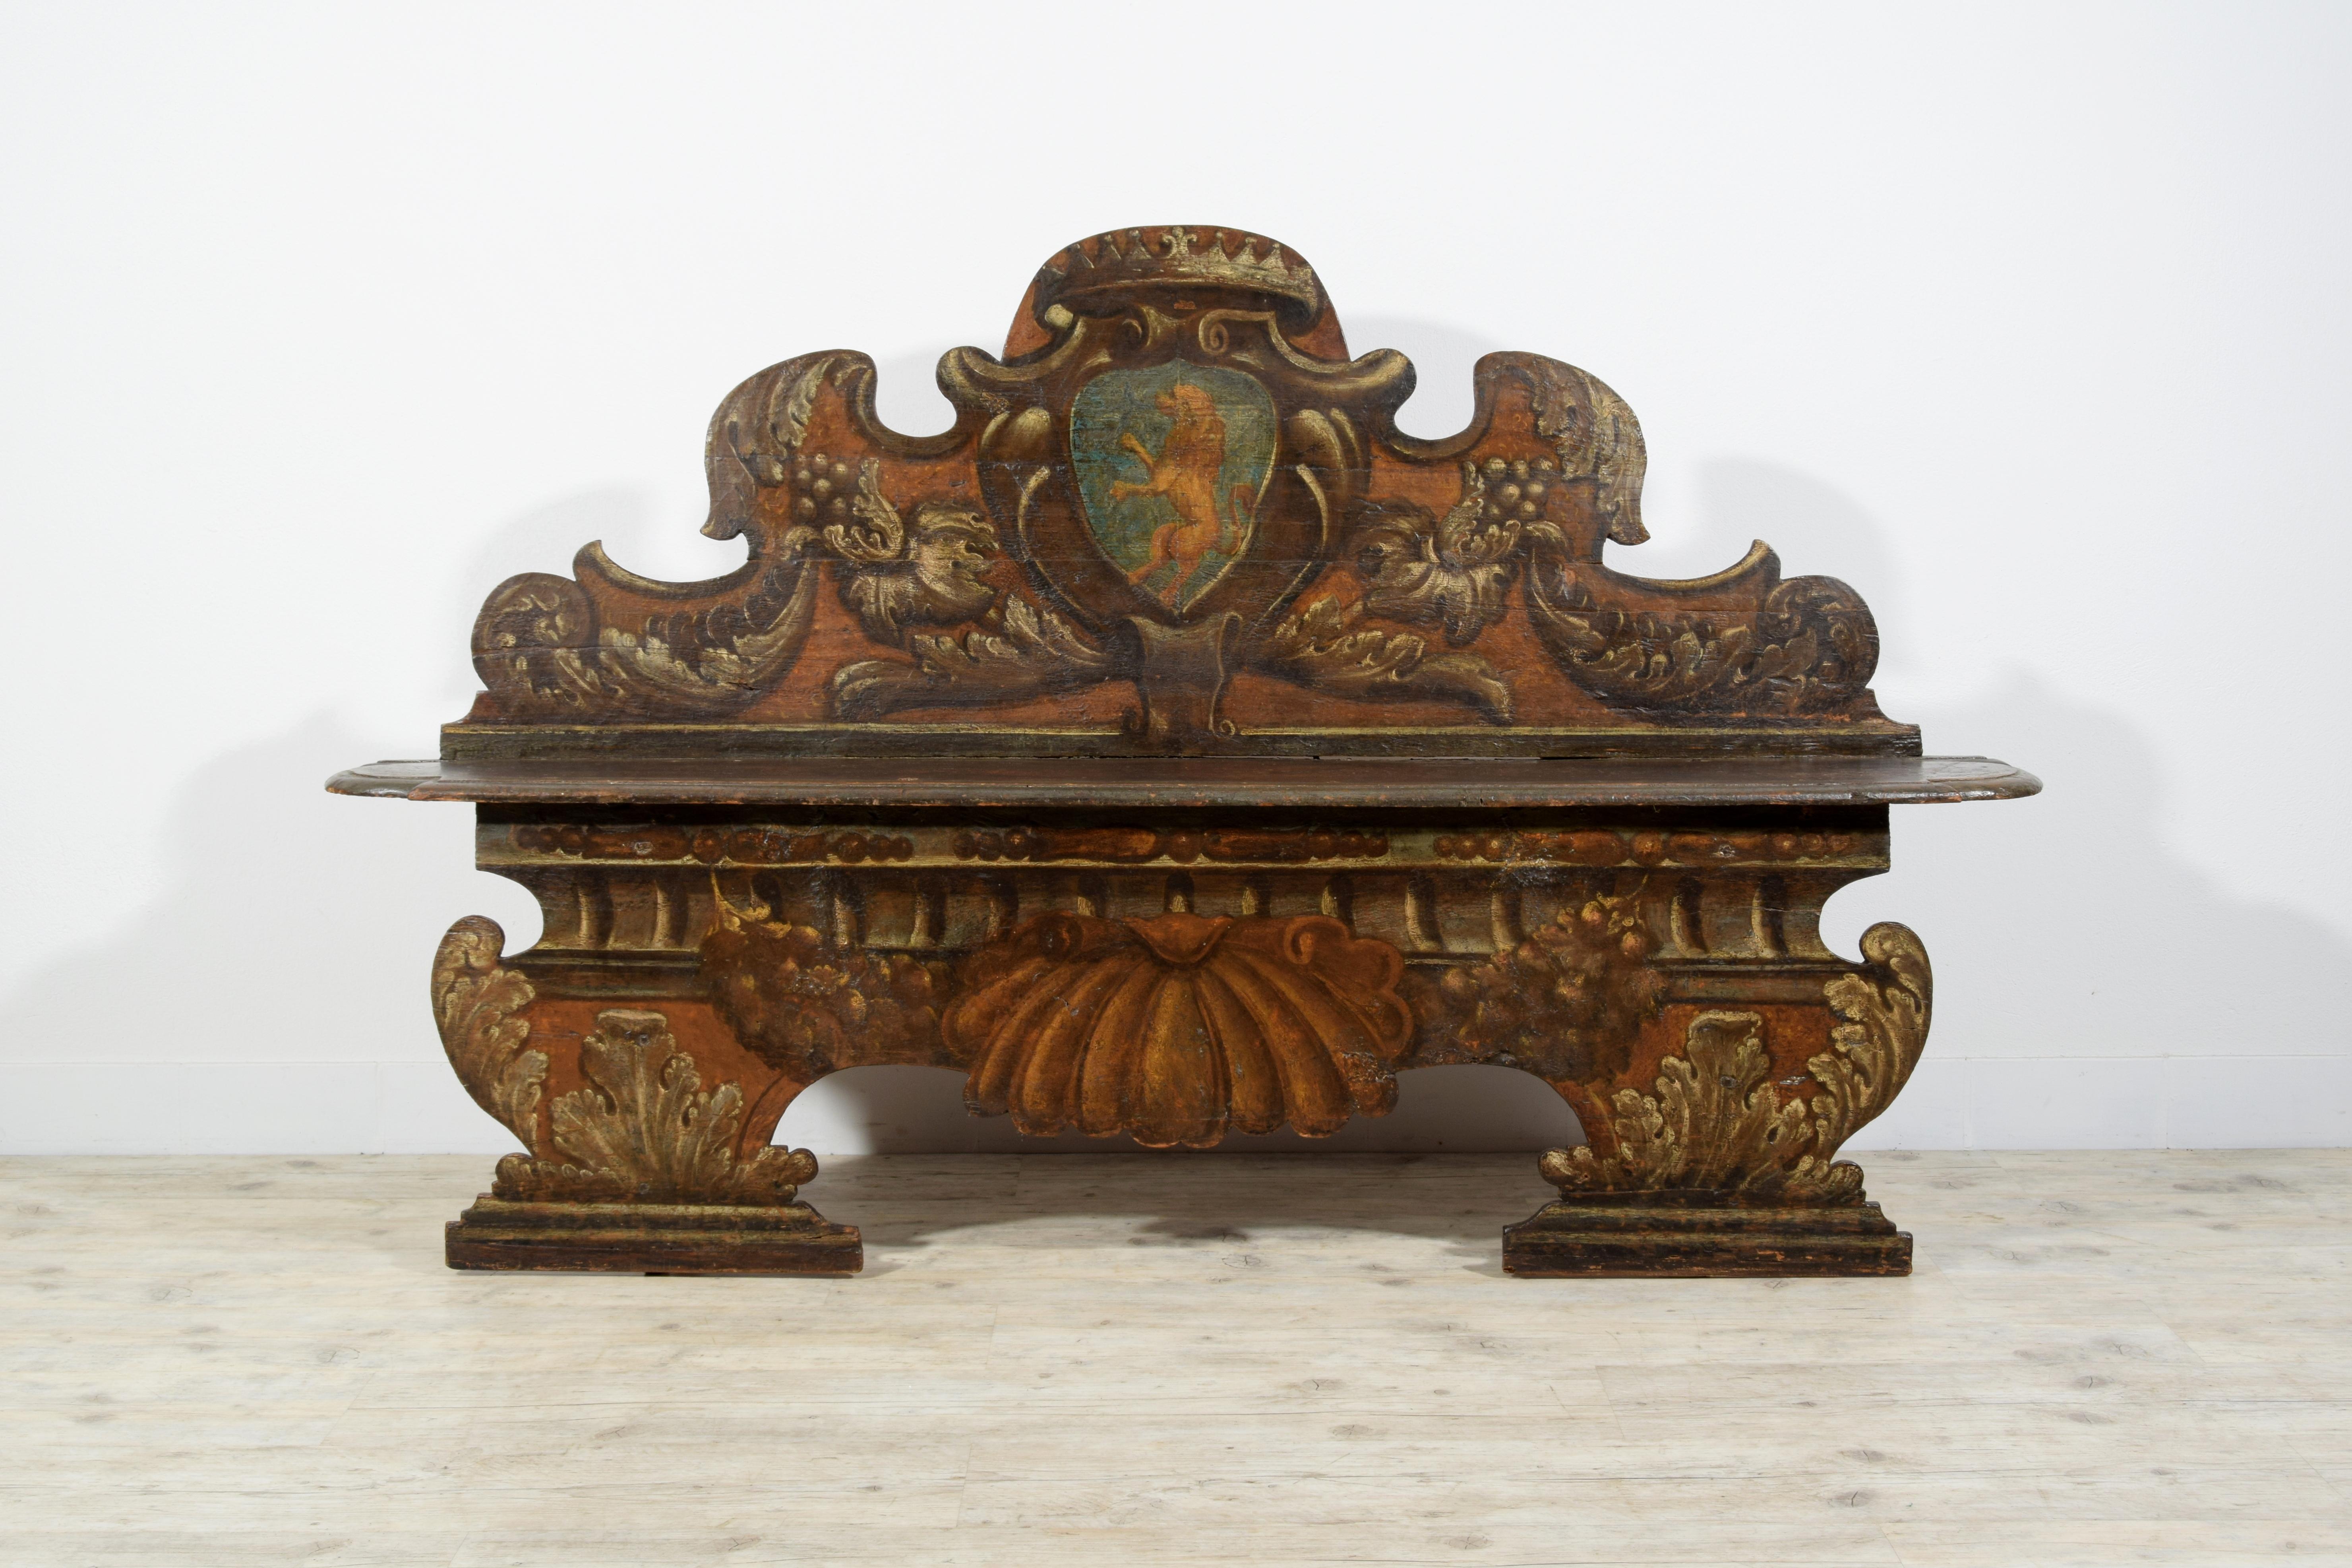 17th century, Italian Baroque Lacquered Wood Bench 

Measurements: W maximum 190 x H 114 x D maximum 31. Seat D 25 x H 54 
This ancient baroque bench was made in Tuscany, Italy, in the seventeenth century. The lacquered wooden structure has trompe